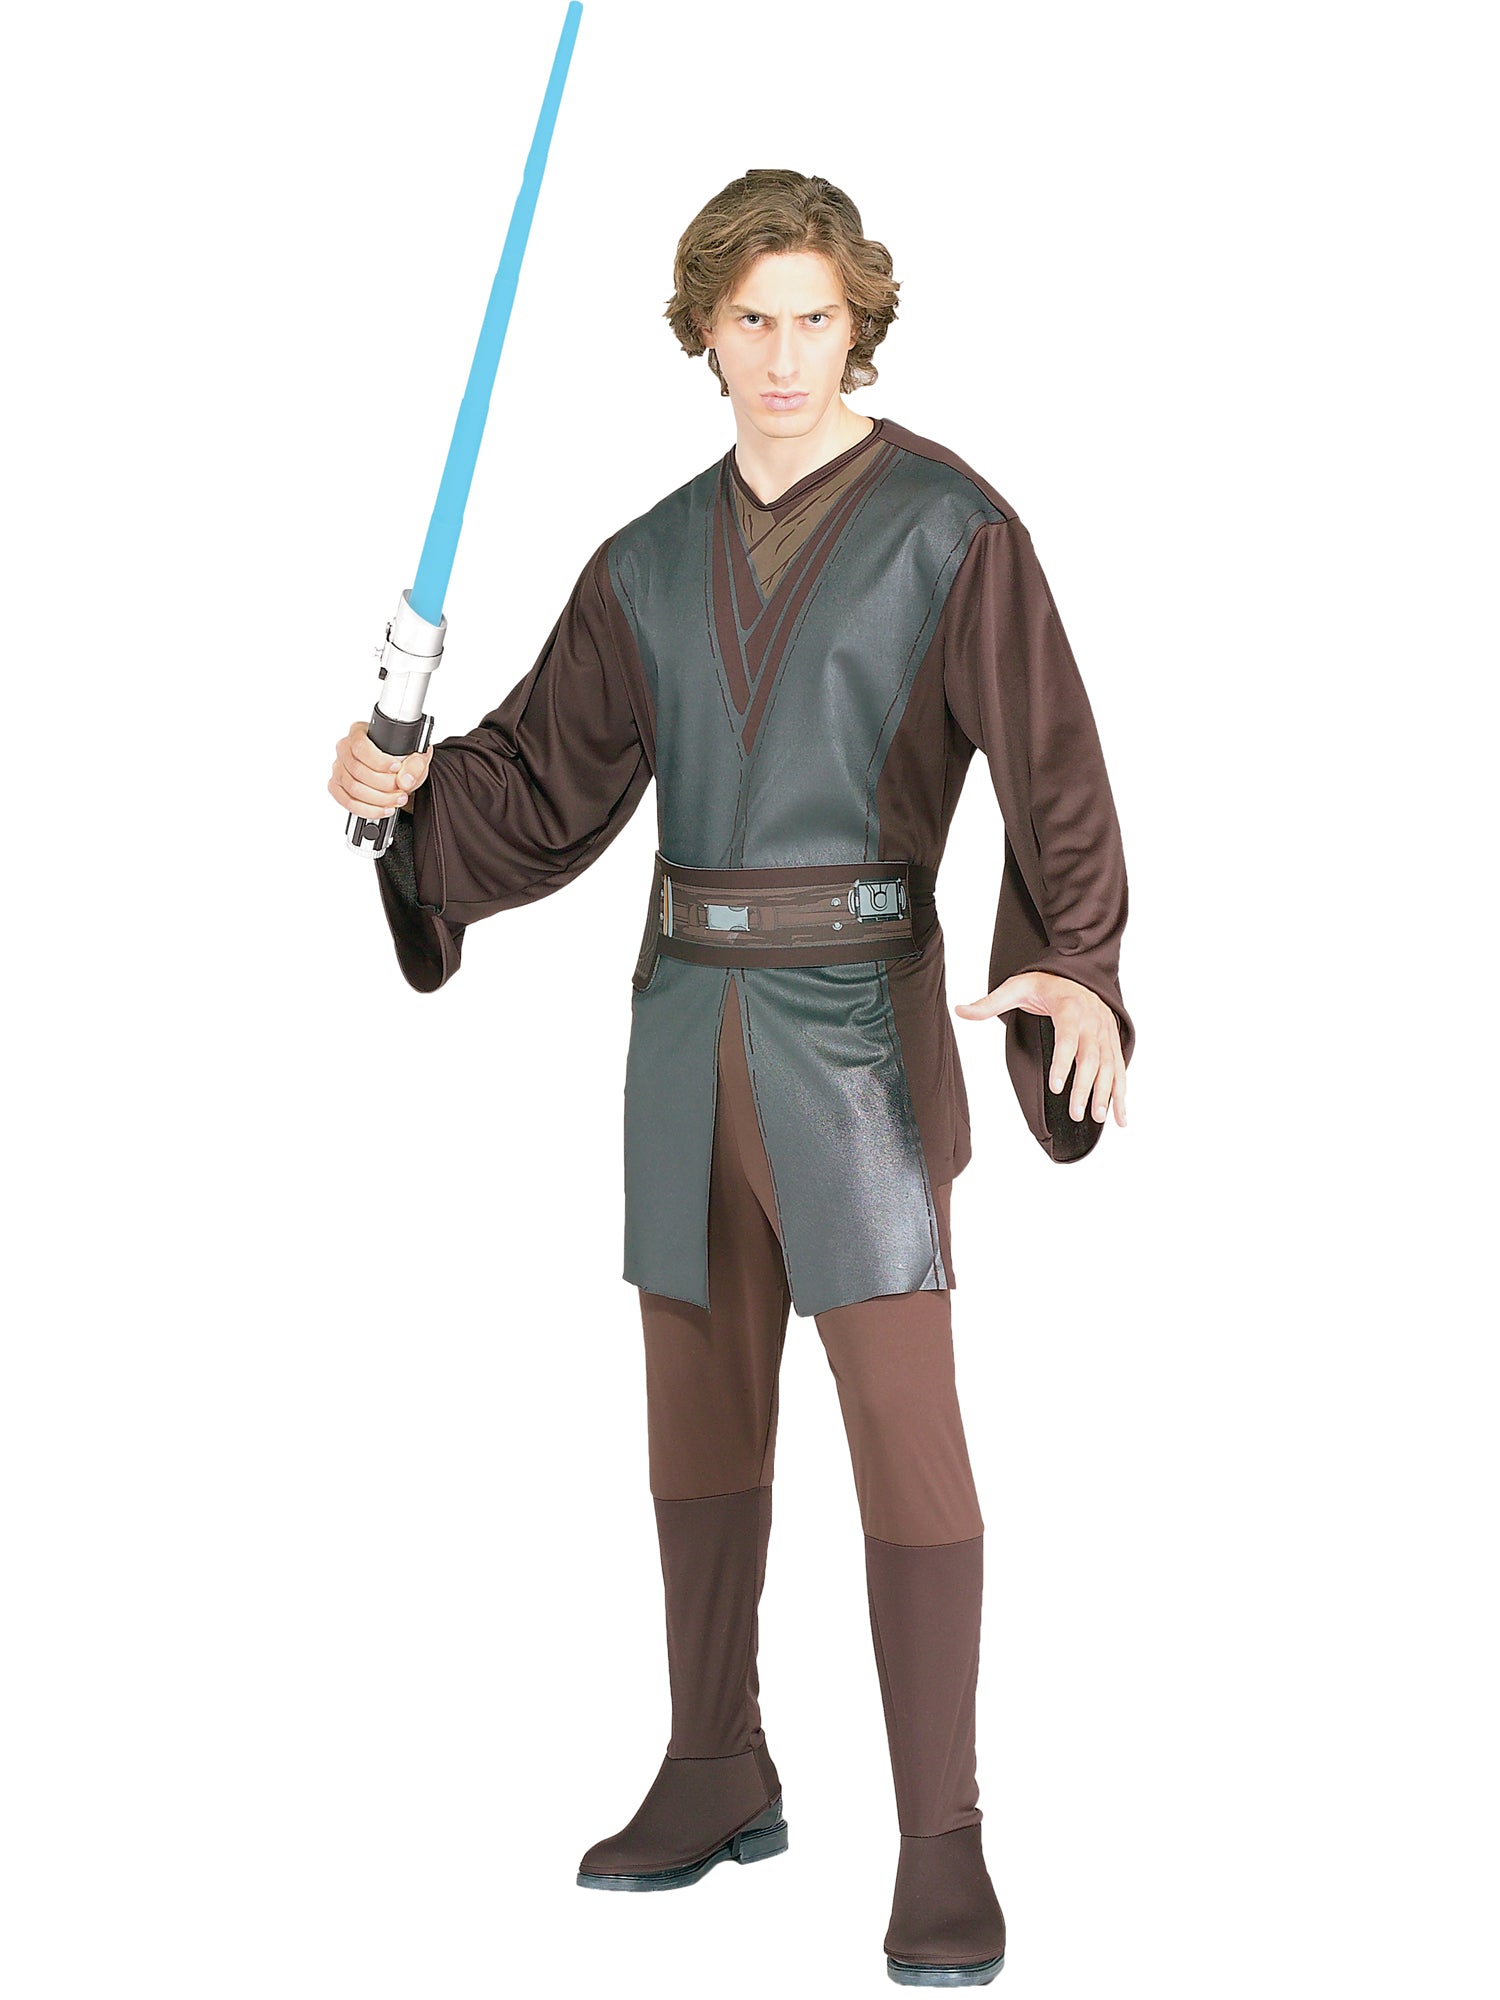 Anakin Skywalker, Revenge Of The Sith, Episode III, Revenge Of The Sith, Multi, Star Wars, Adult Costume, Extra Large, Front